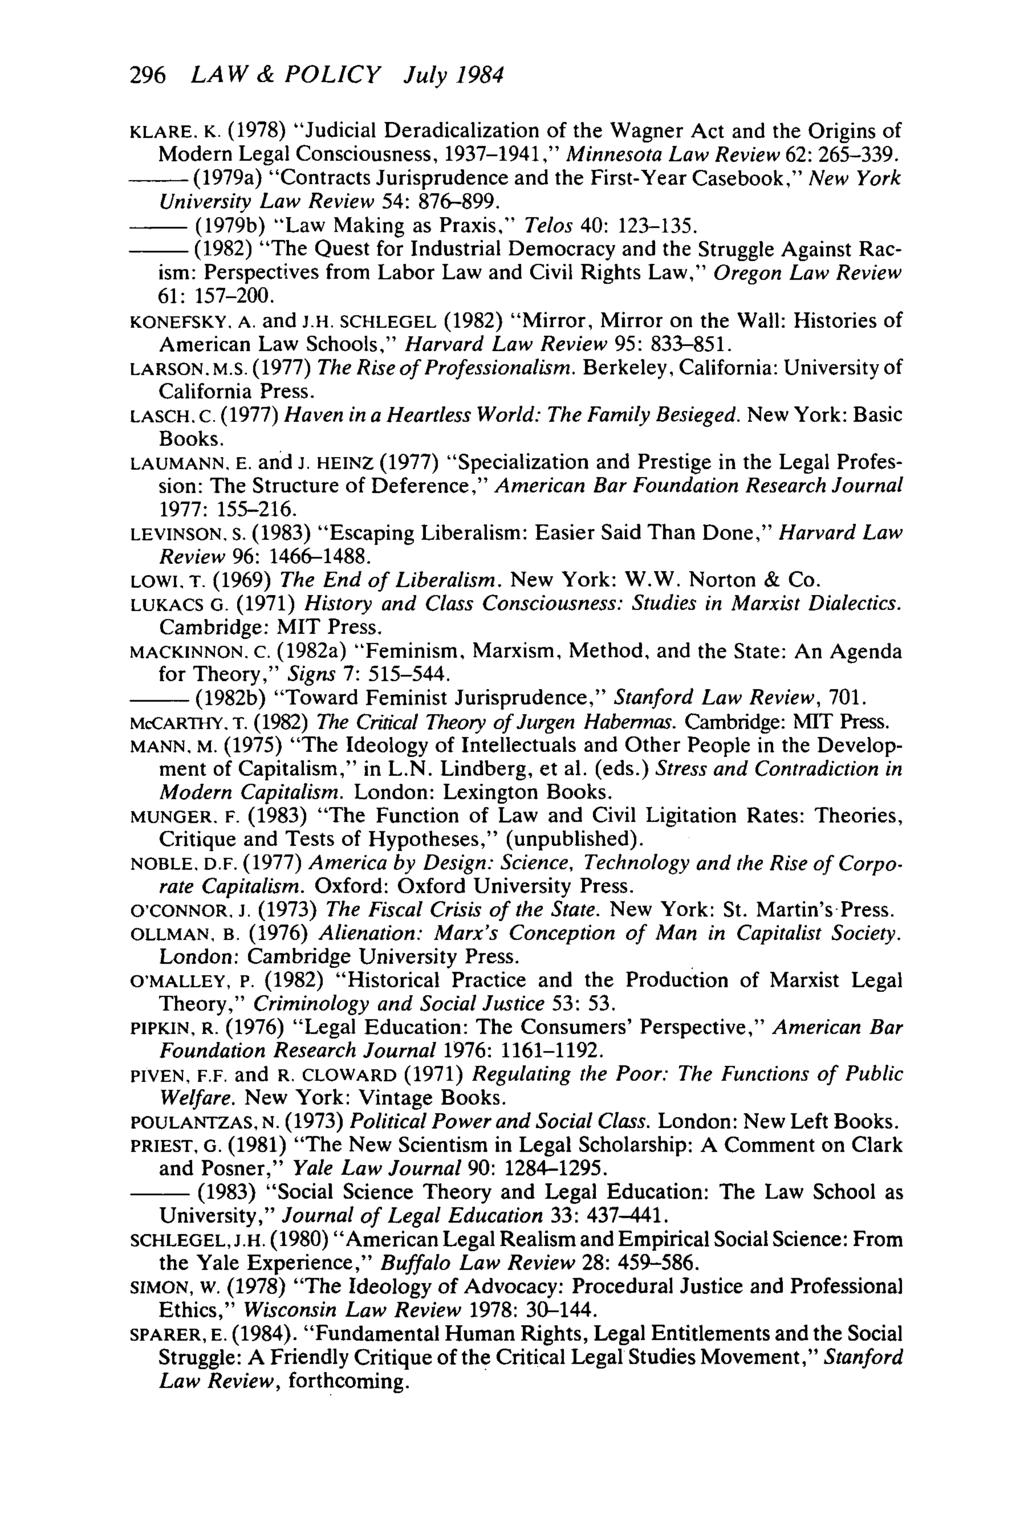 296 LAW & POLICY July 1984 KLARE. K. (1978) "Judicial Deradicalization of the Wagner Act and the Origins of Modern Legal Consciousness, 1937-1941," Minnesota Law Review 62: 265-339.